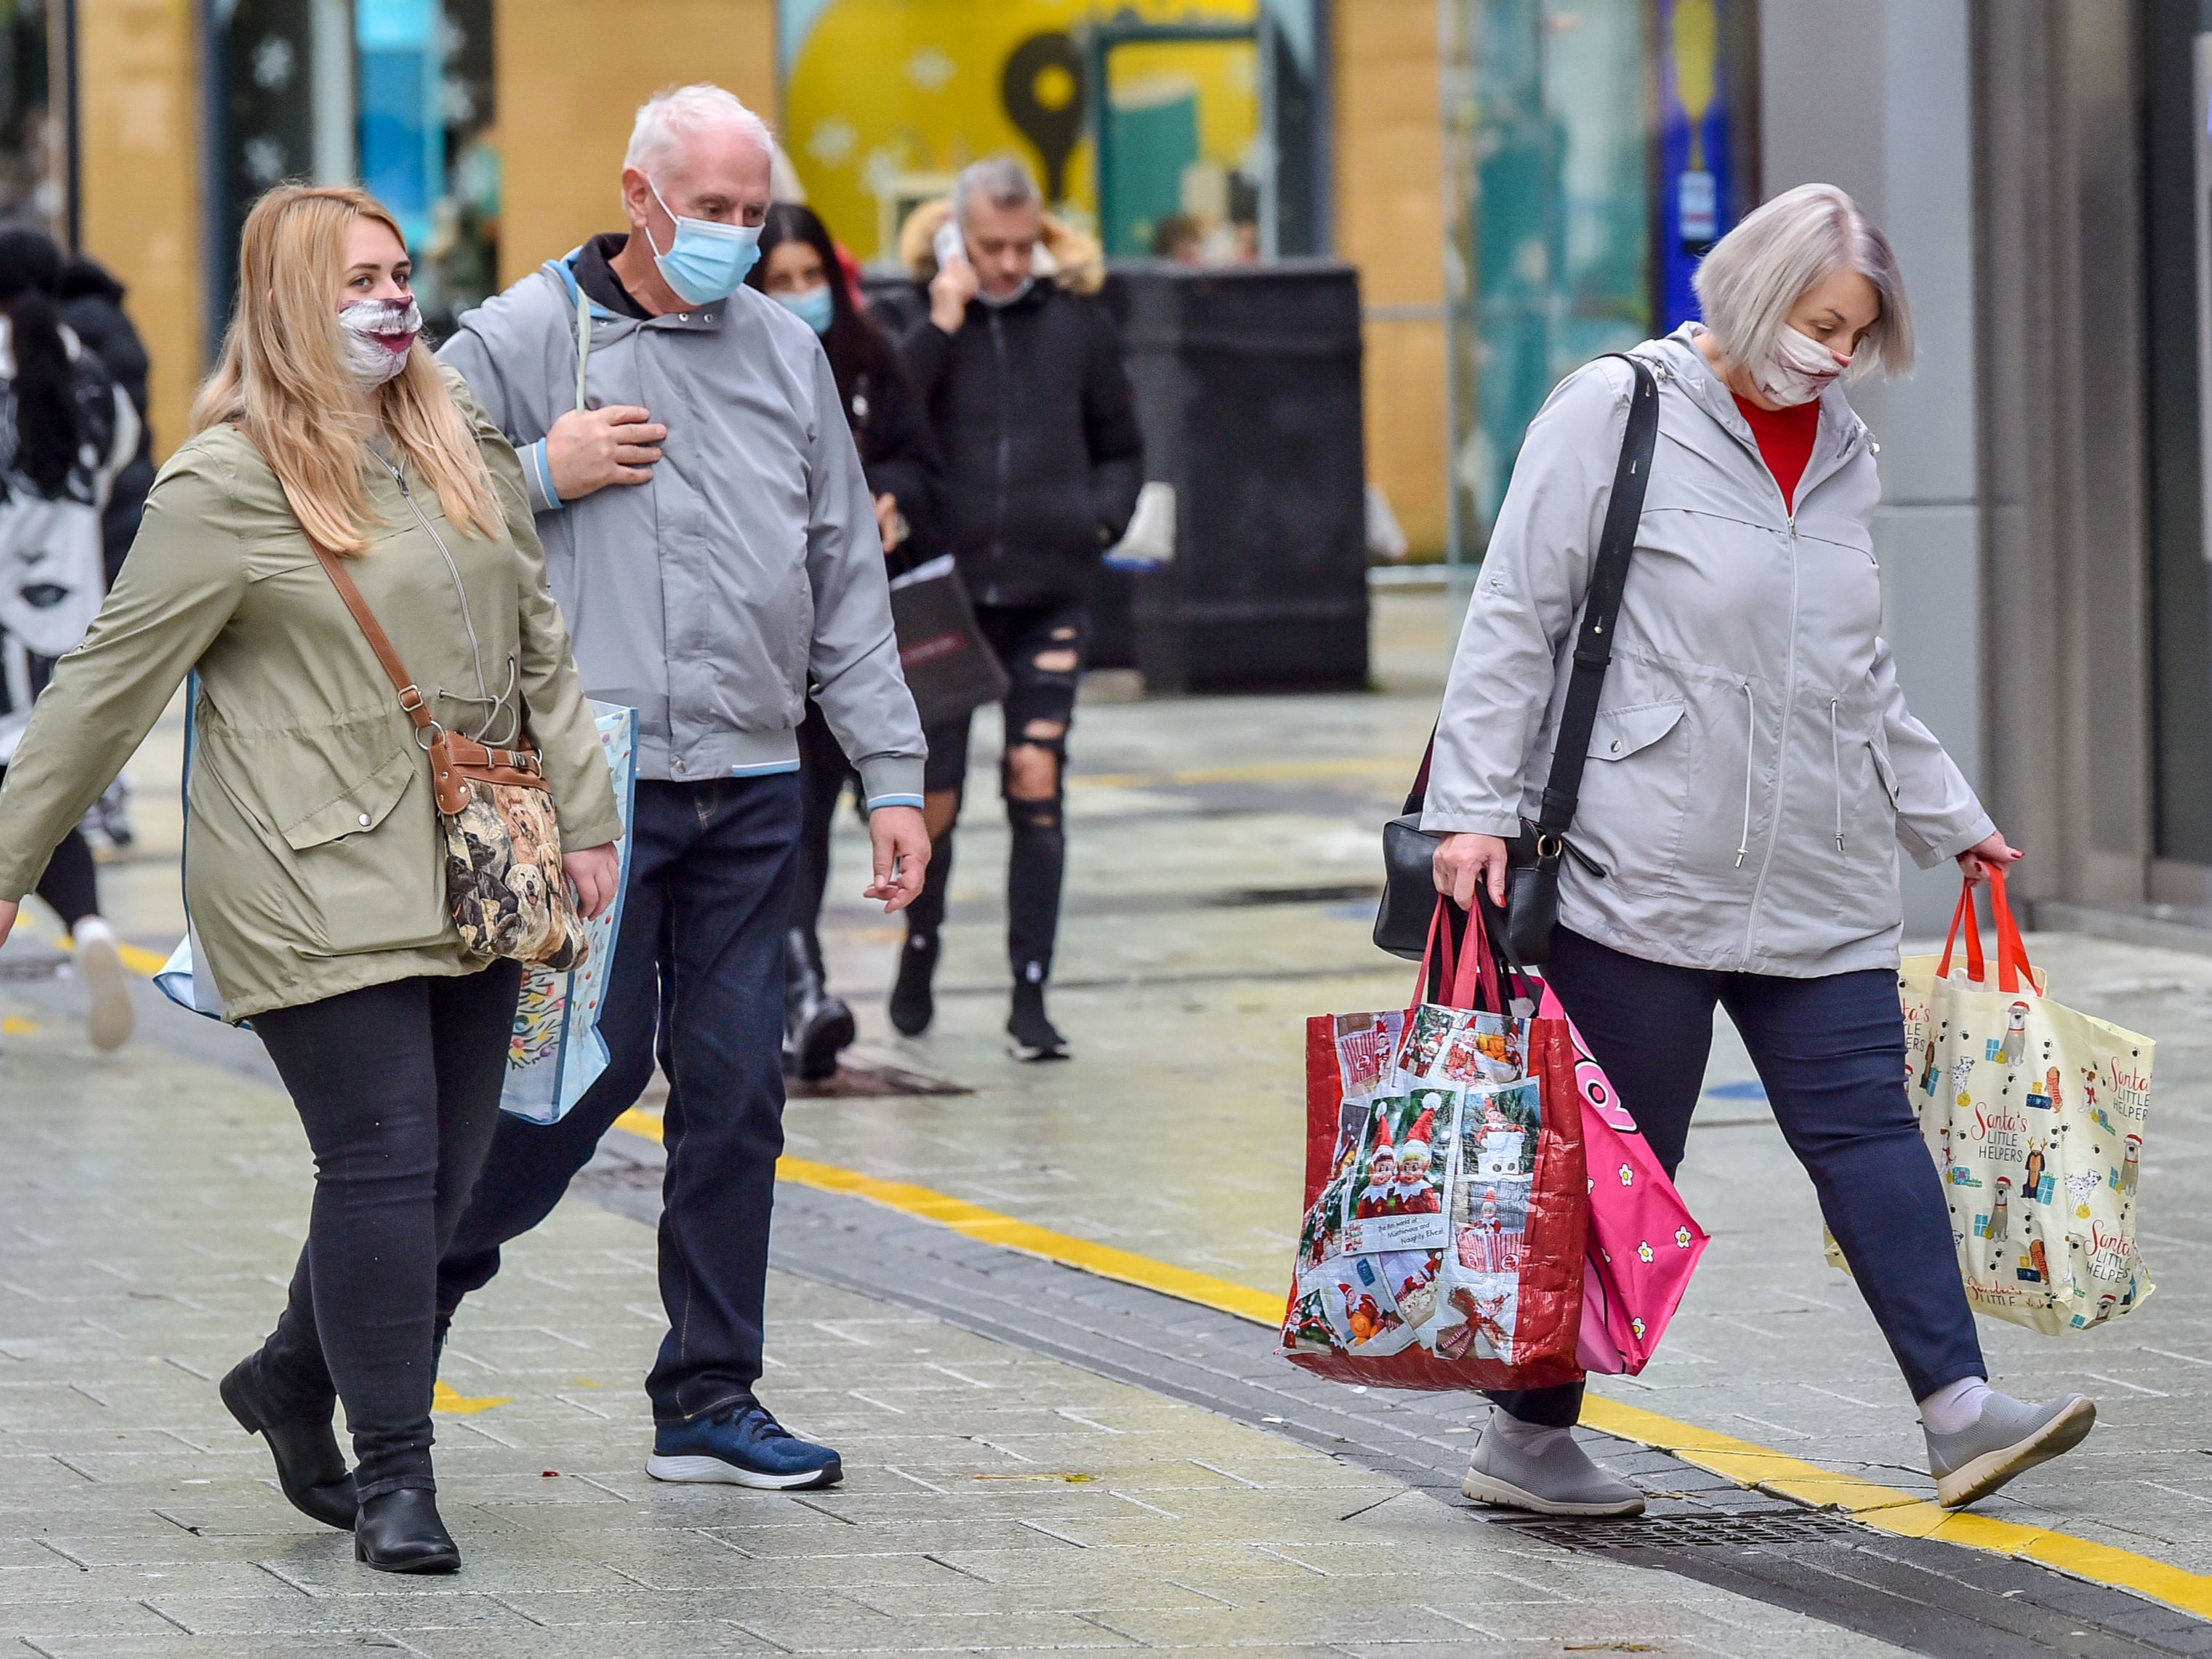 Shoppers in Cardiff